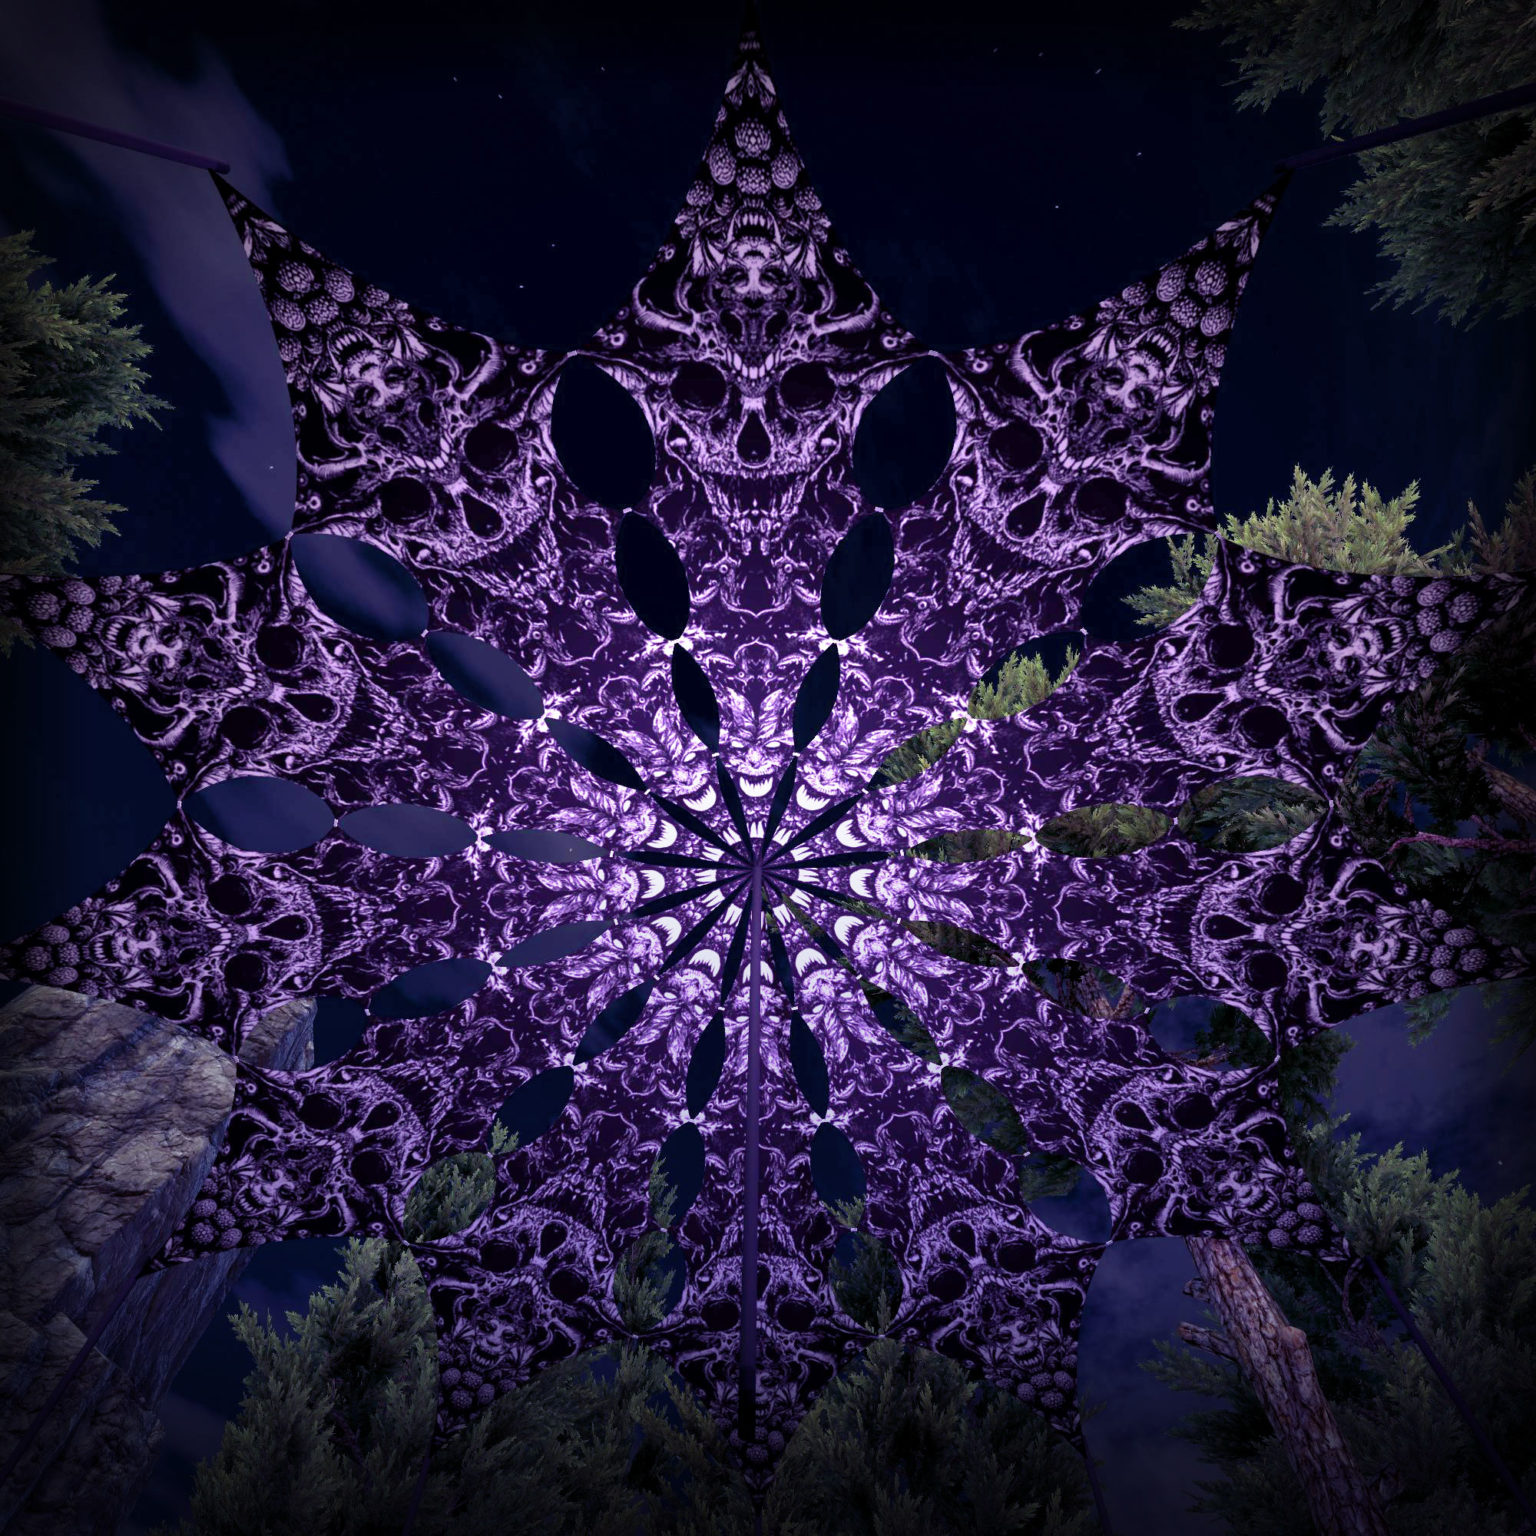 Helloween - Urzonuth -Psychedelic Black&White Canopy - 12 petals set -3D-Preview